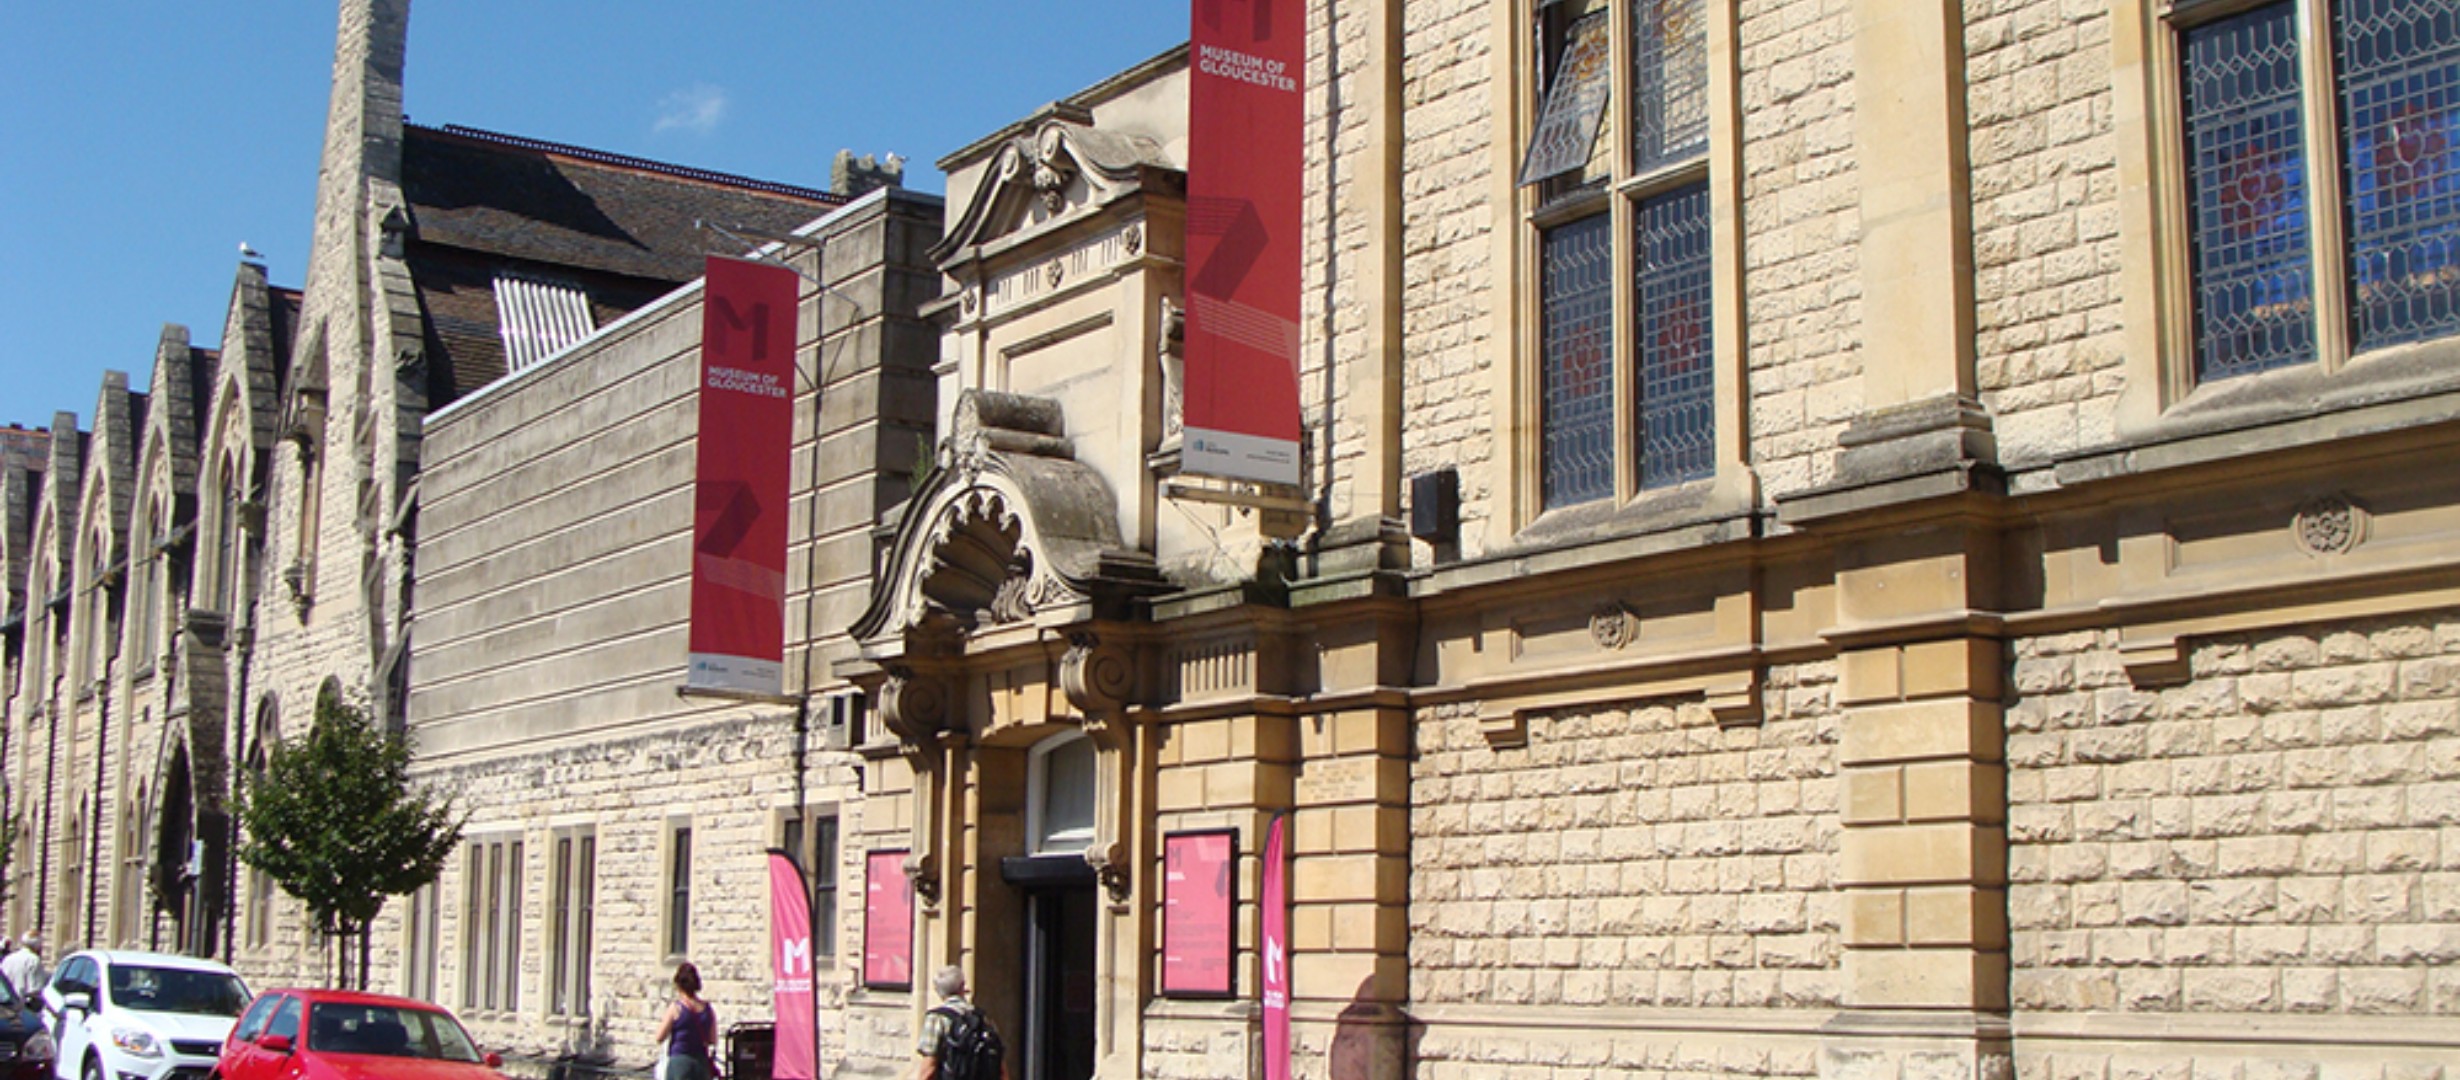 The Museum of Gloucester